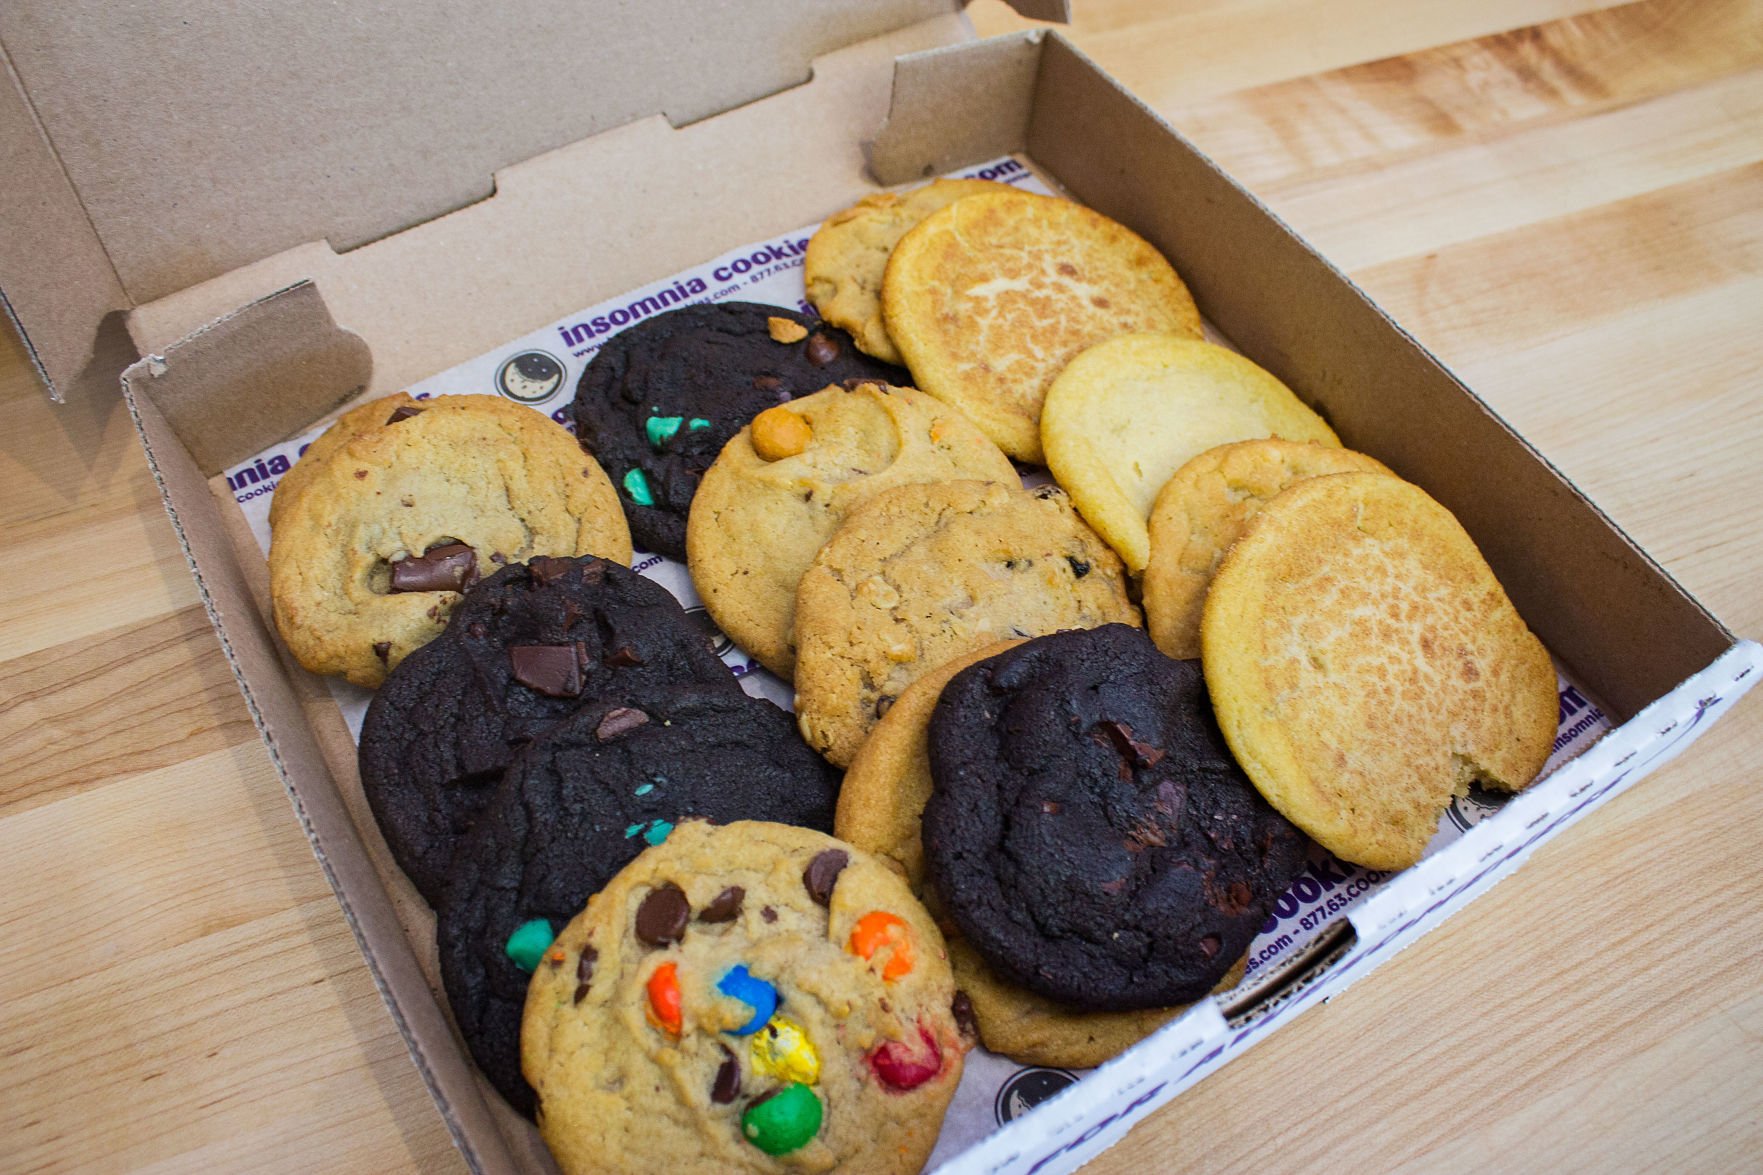 insomnia cookies delivery chicago